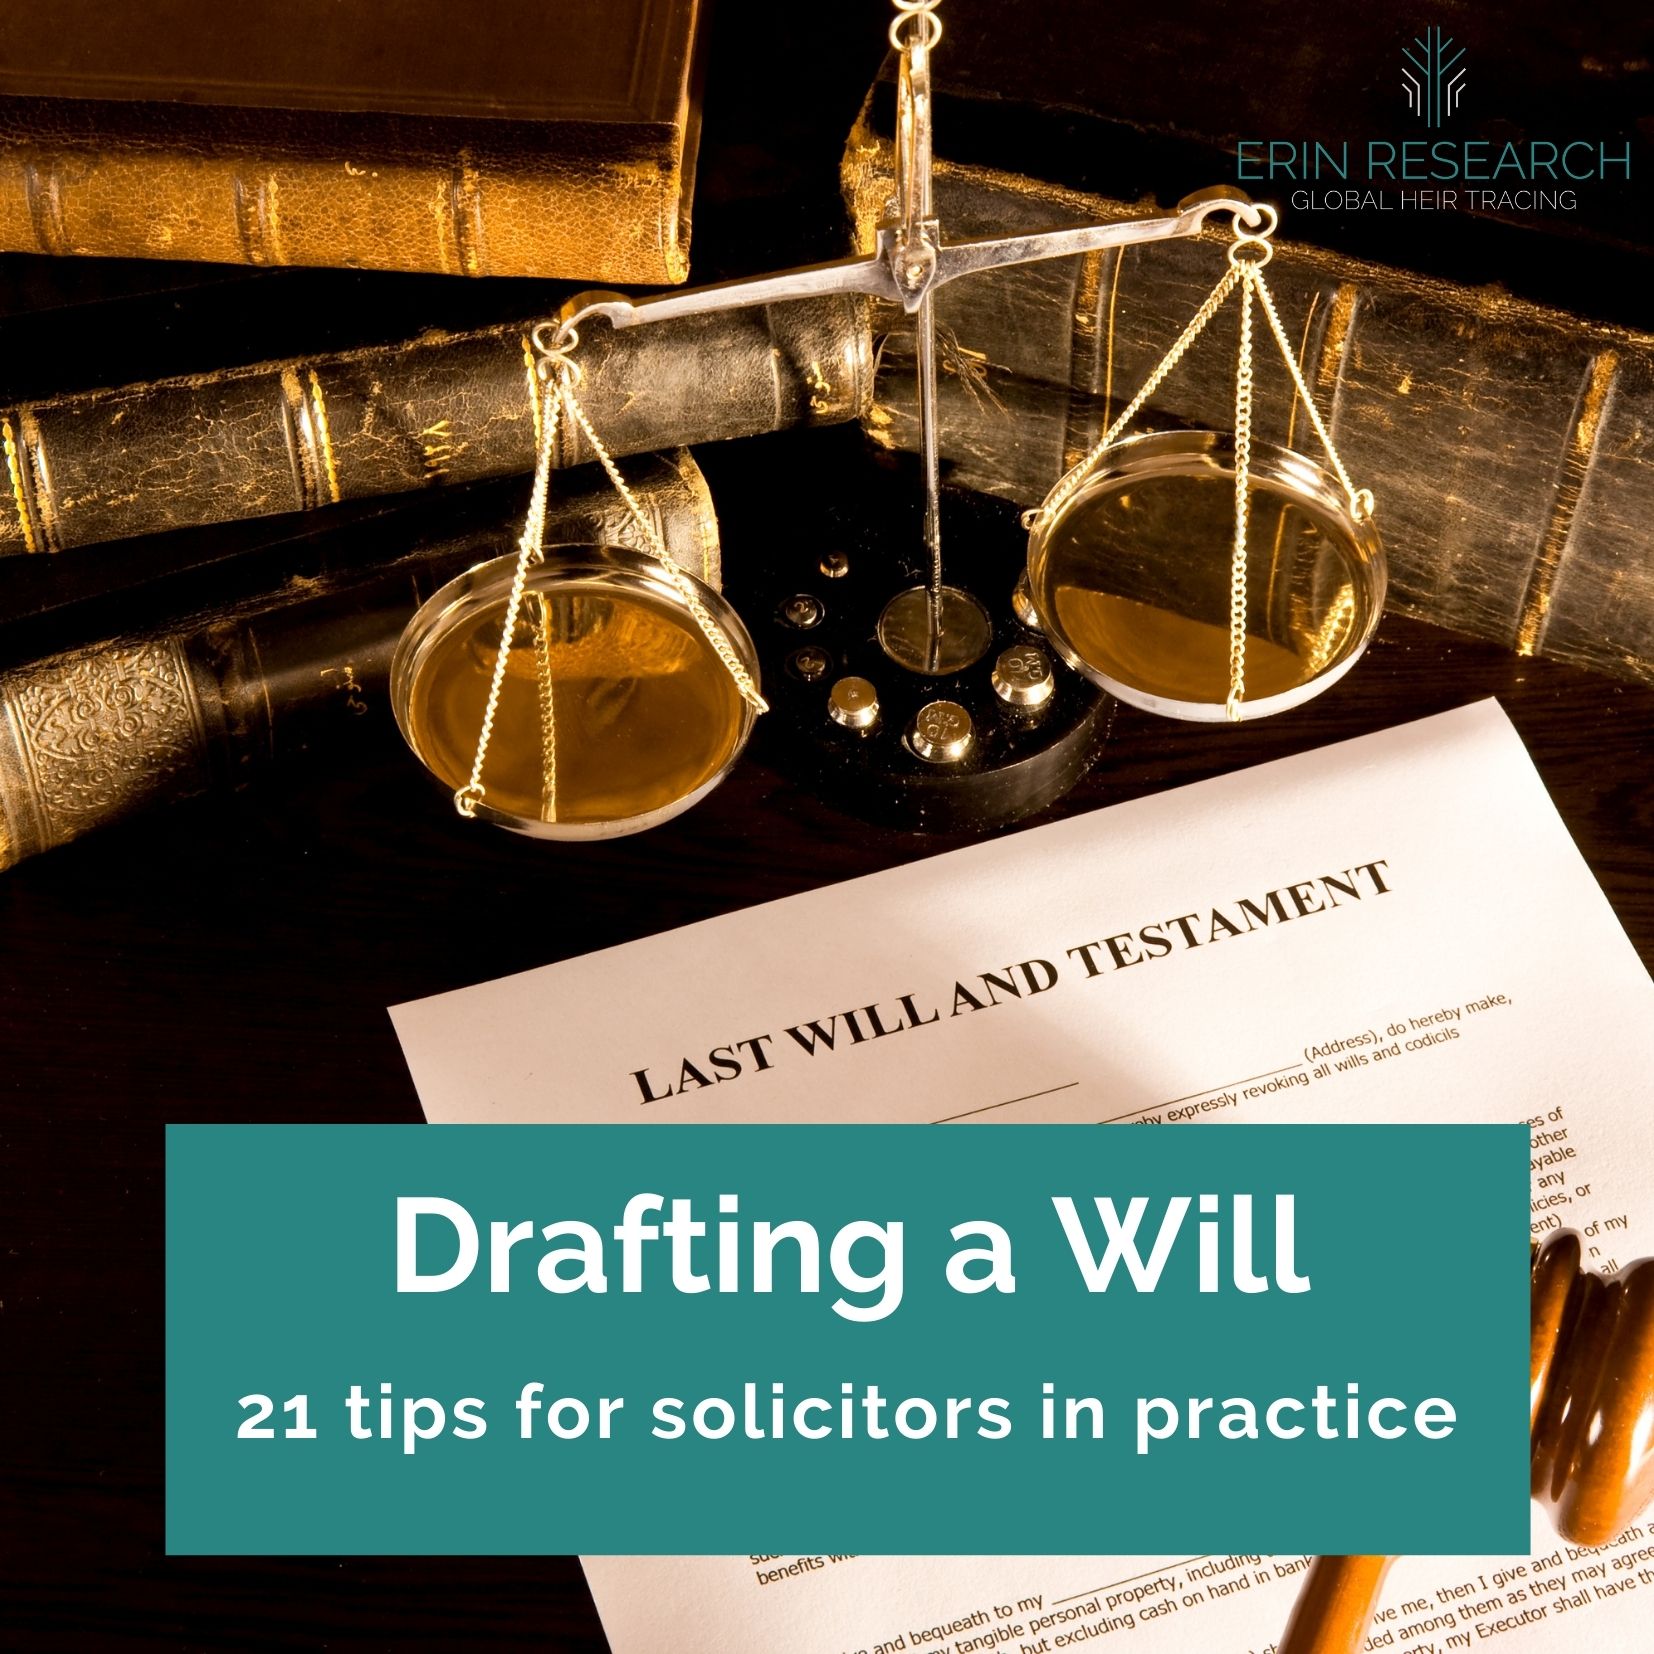 Drafting a will - 21 tips for solicitors - practice tips for drafting wills